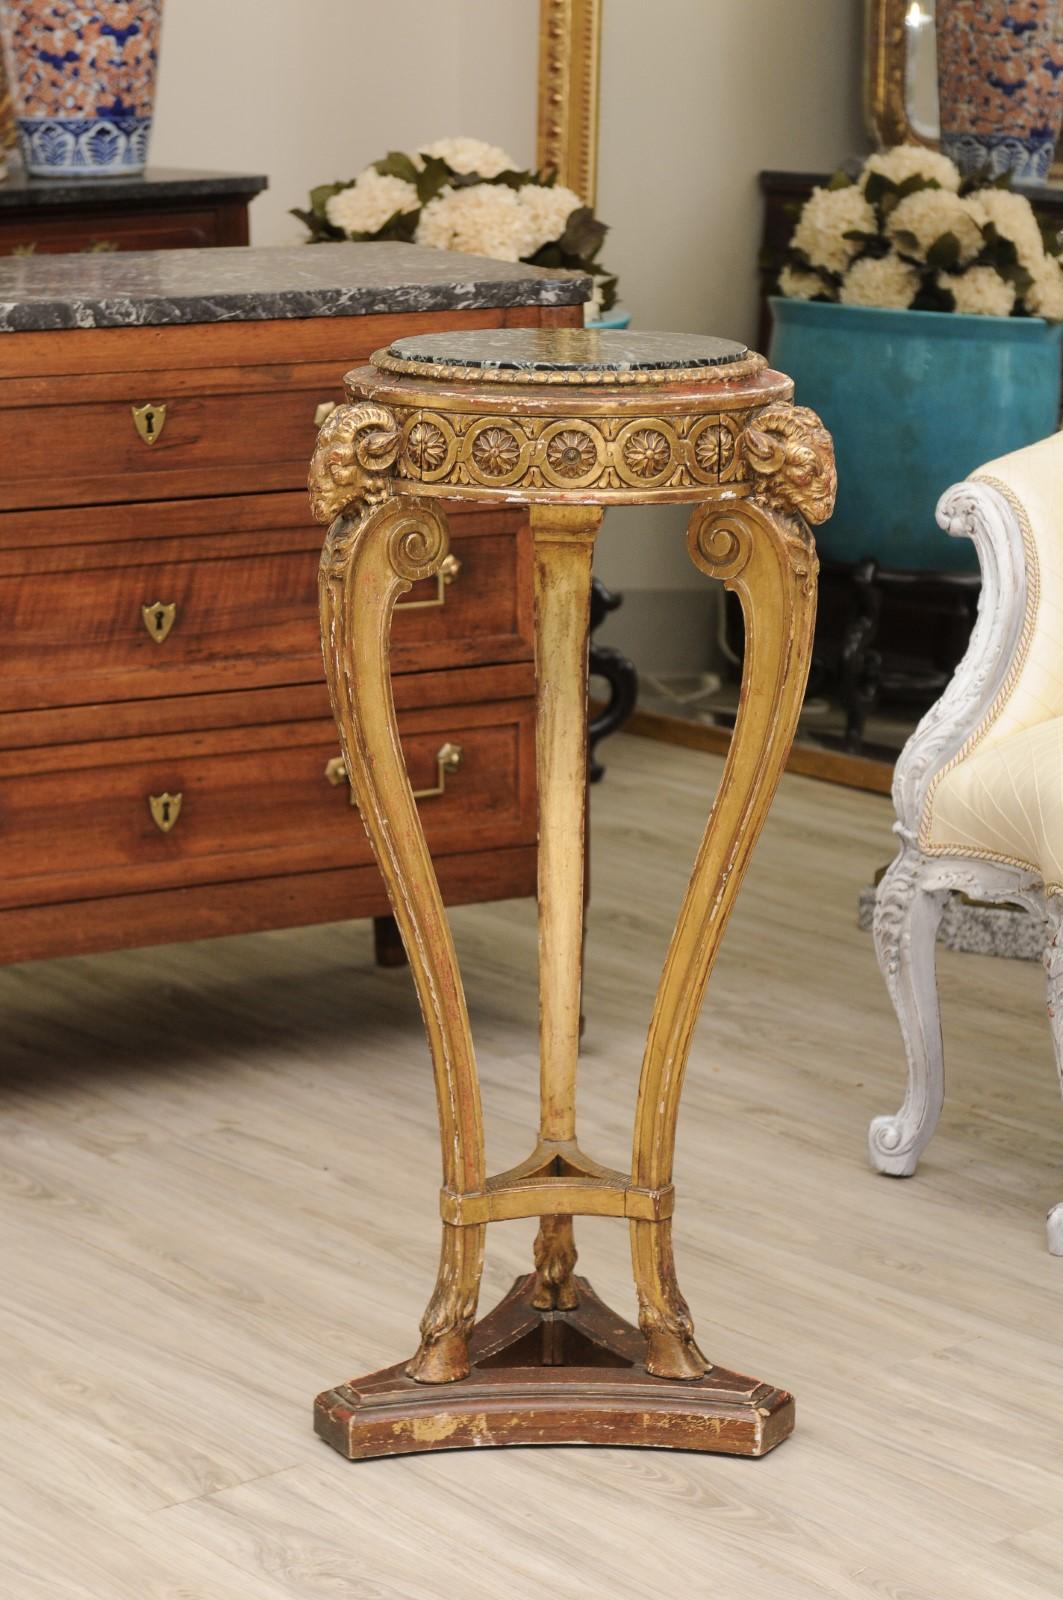 This highly carved period Empire pedestal has carved rams heads on three corners which are at the top of the 3 curved legs with paw feet. The legs stand on a wooden triangular shape base. Giltwood and original marble top.